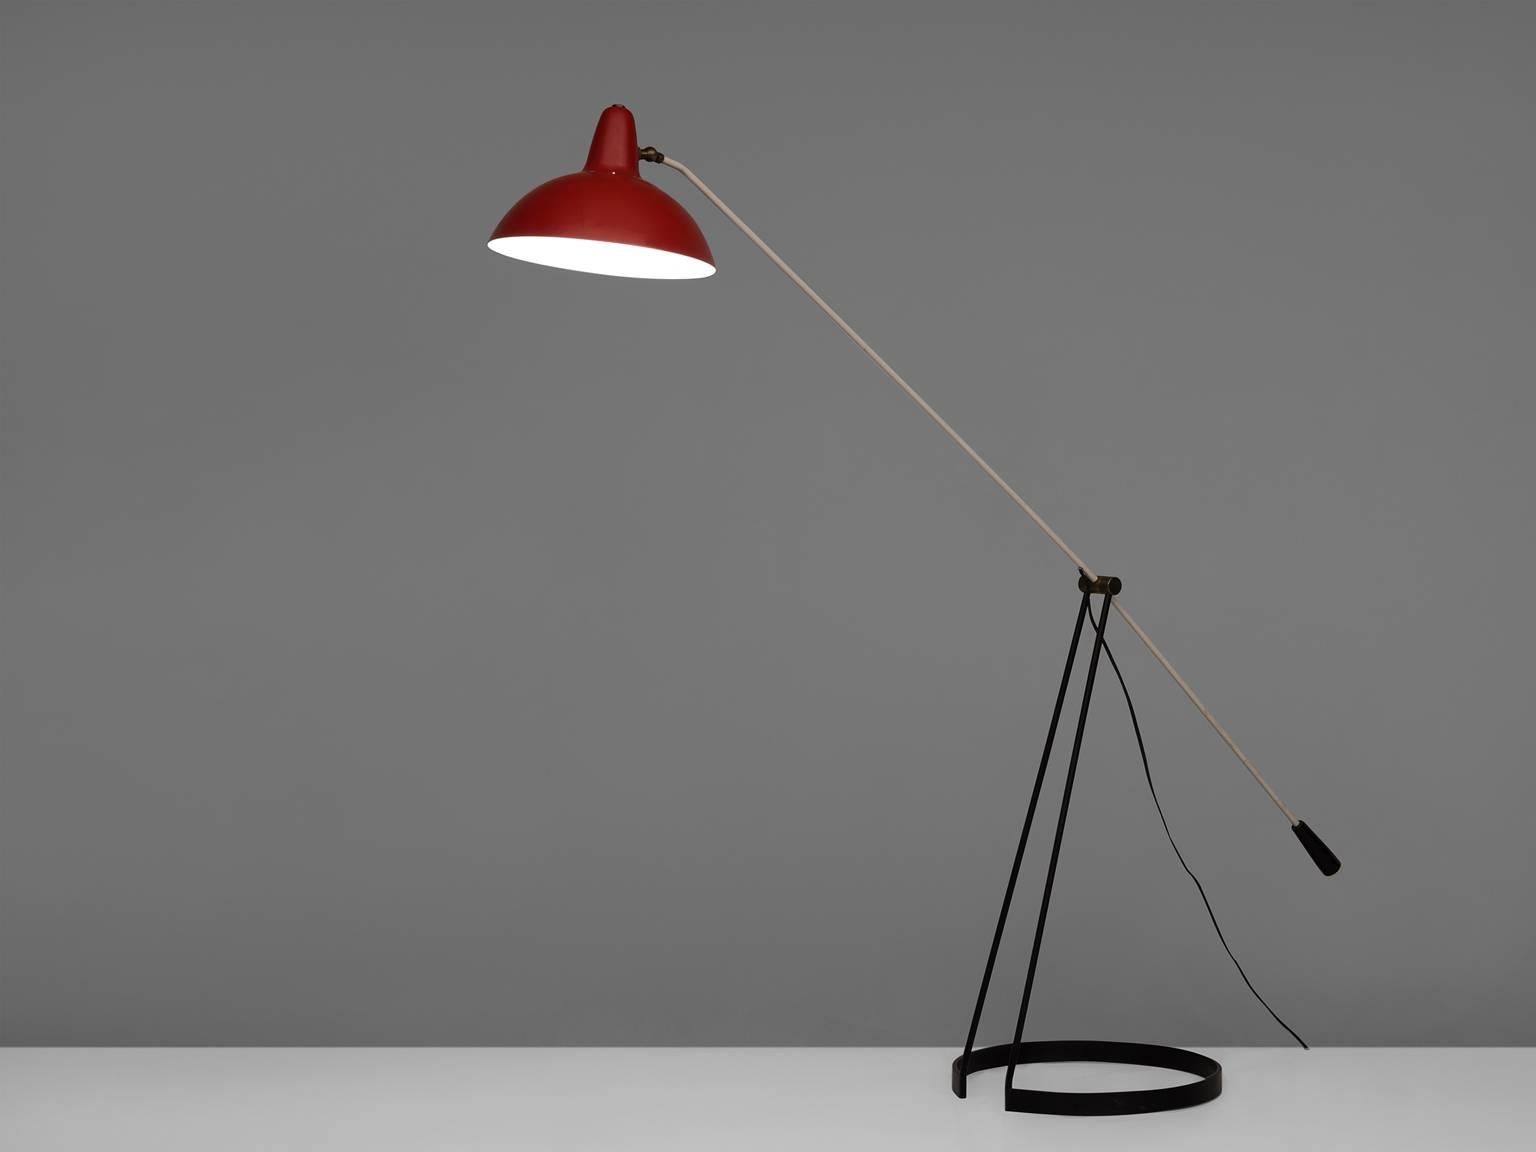 Tivoli Grasshopper floor lamp, black painted metal floor lamp with dark red shade by Floris Fiedeldij, The Netherlands, 1956. 

This quirky lamp with round base open from the fifties is designed by Floris H. Fiedeldij for Artimeta. The lamp, with